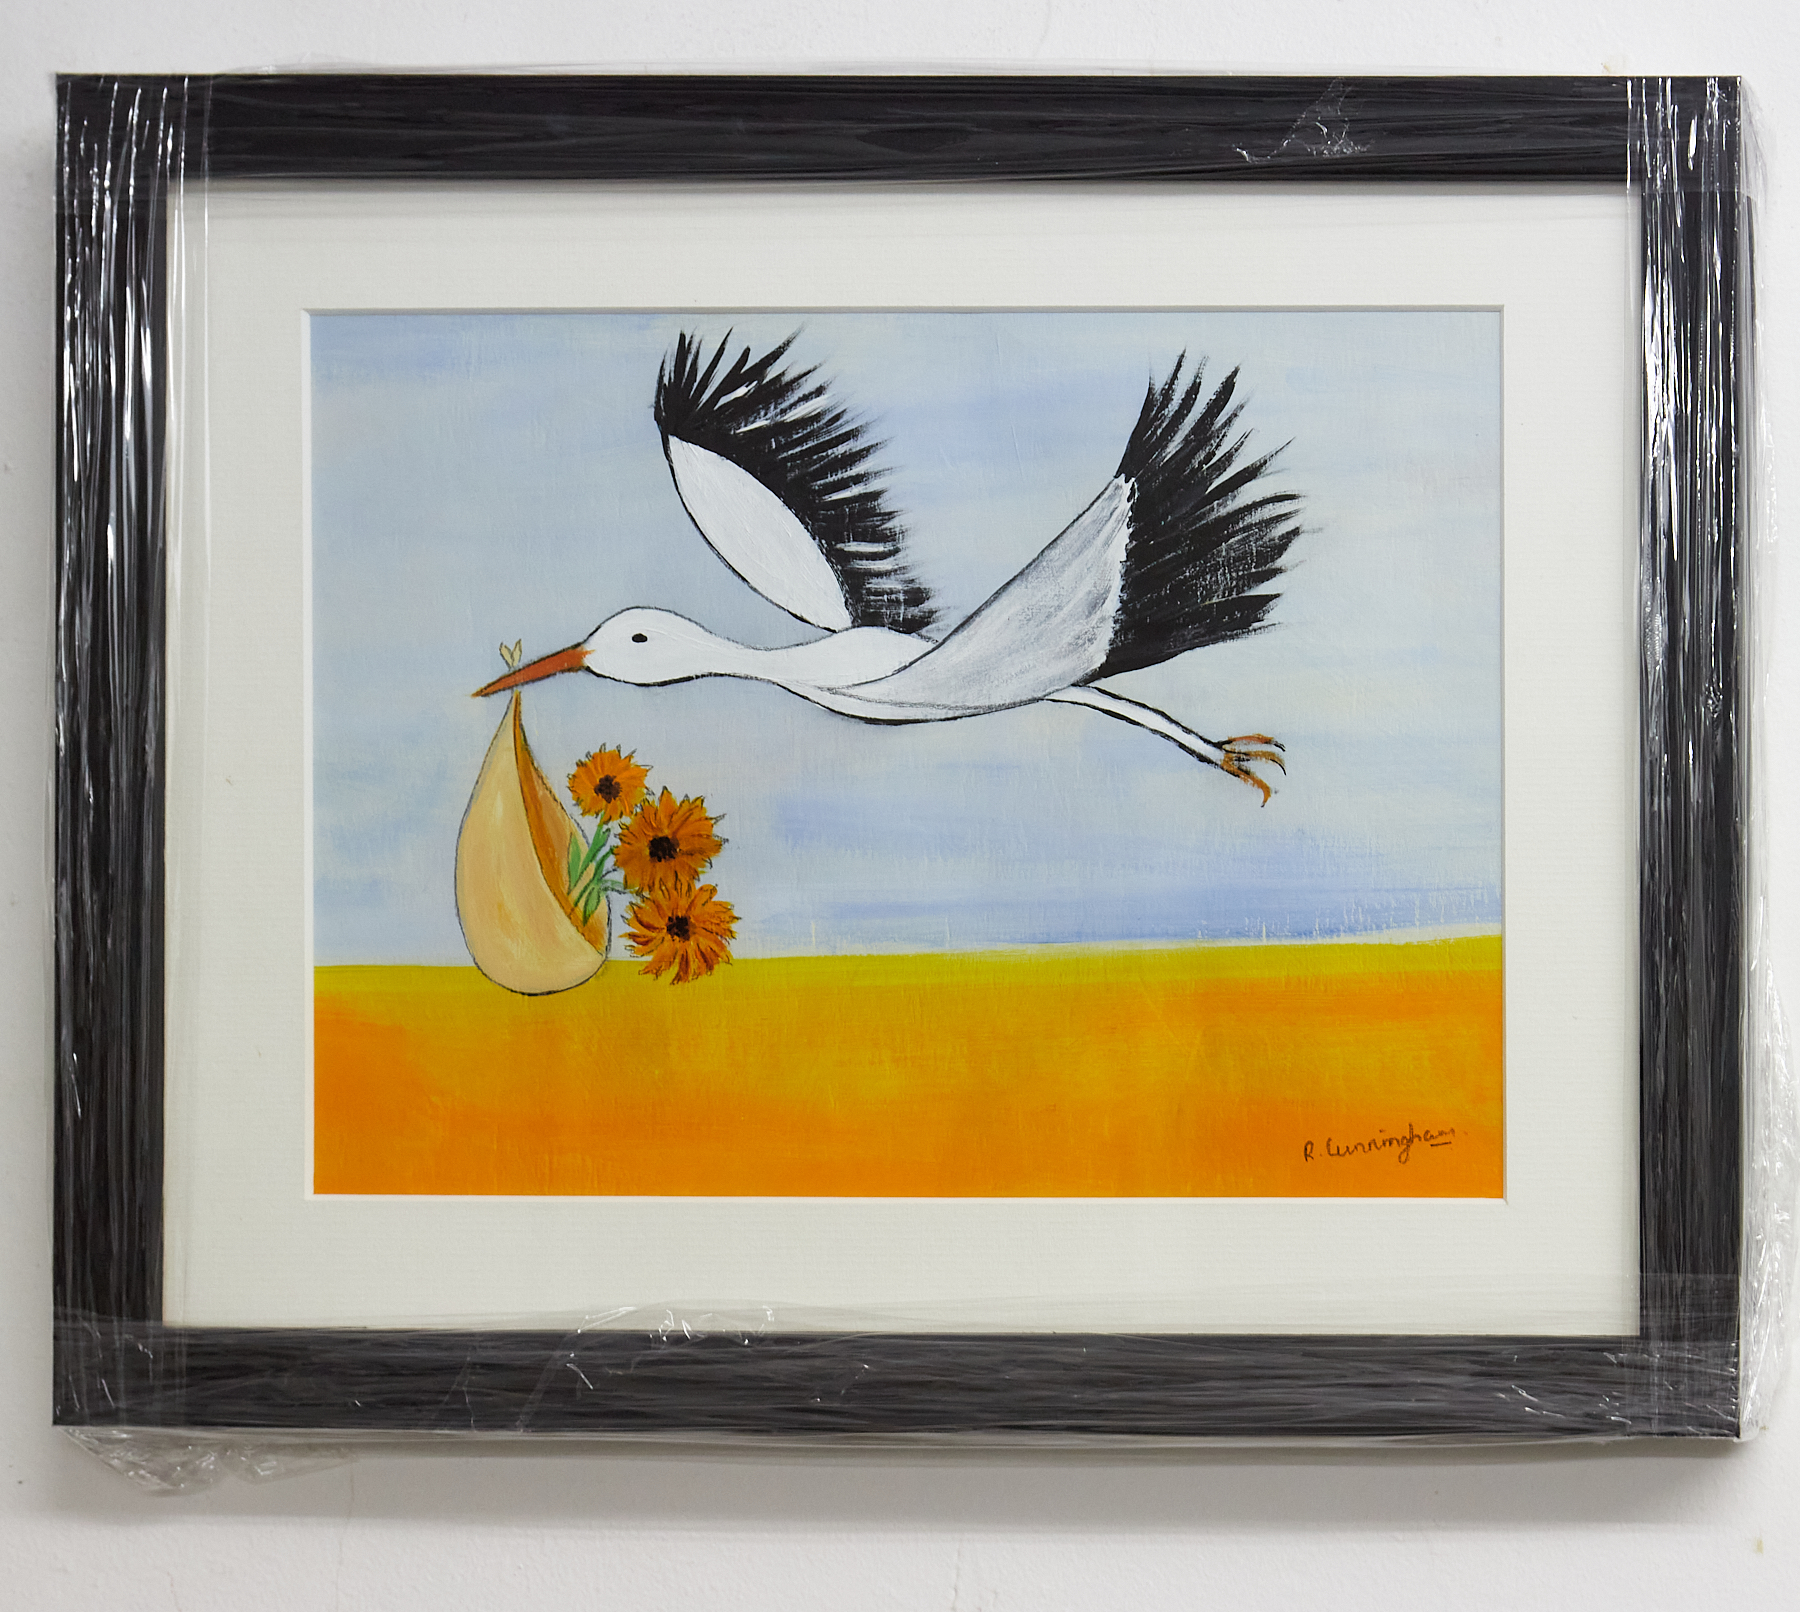 Rosie Cunningham, British , Acrylic - Arrival of the Stork . Rosie is a well known Plymouth based